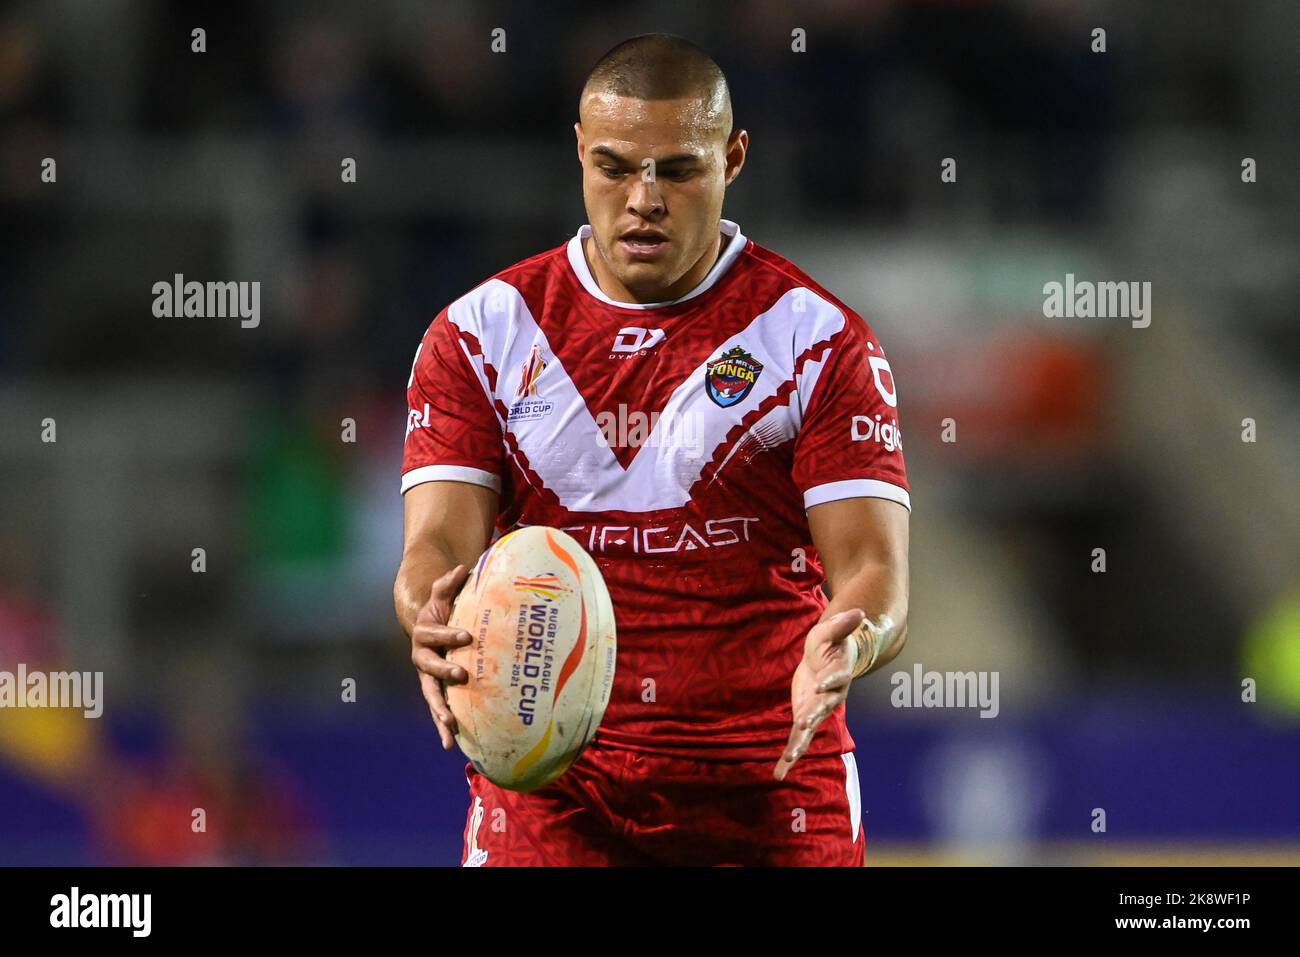 Tui Lolohea of Tonga in action during the Rugby League World Cup 2021 match  Tonga vs Wales at Totally Wicked Stadium, St Helens, United Kingdom, 24th  October 2022 (Photo by Craig Thomas/News